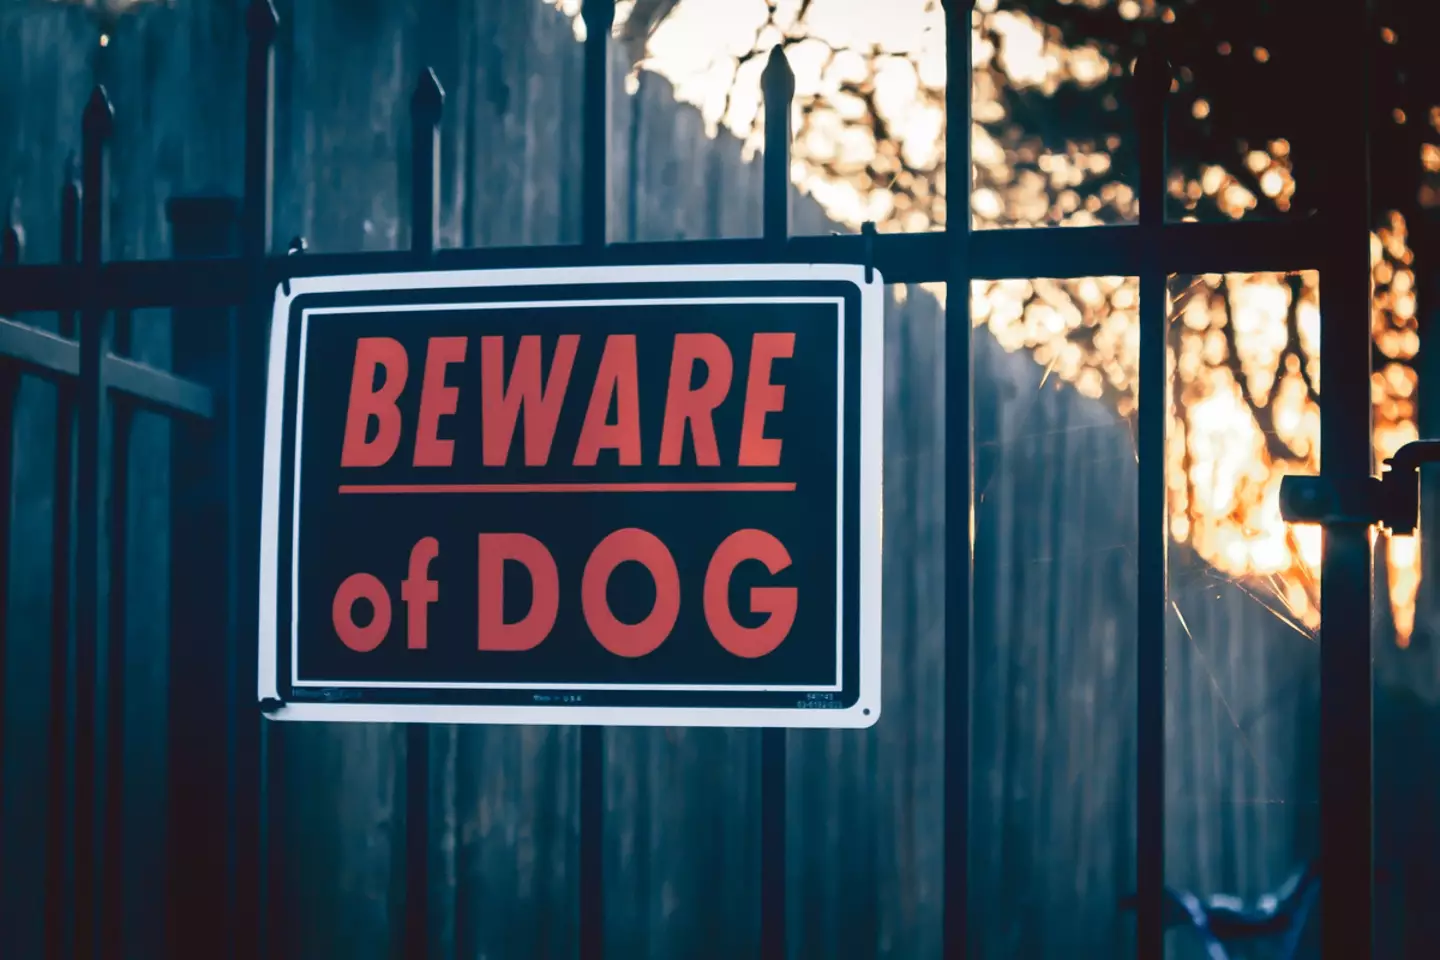 Home insurance companies have warned against putting up 'Beware of the Dog' signs around your property.